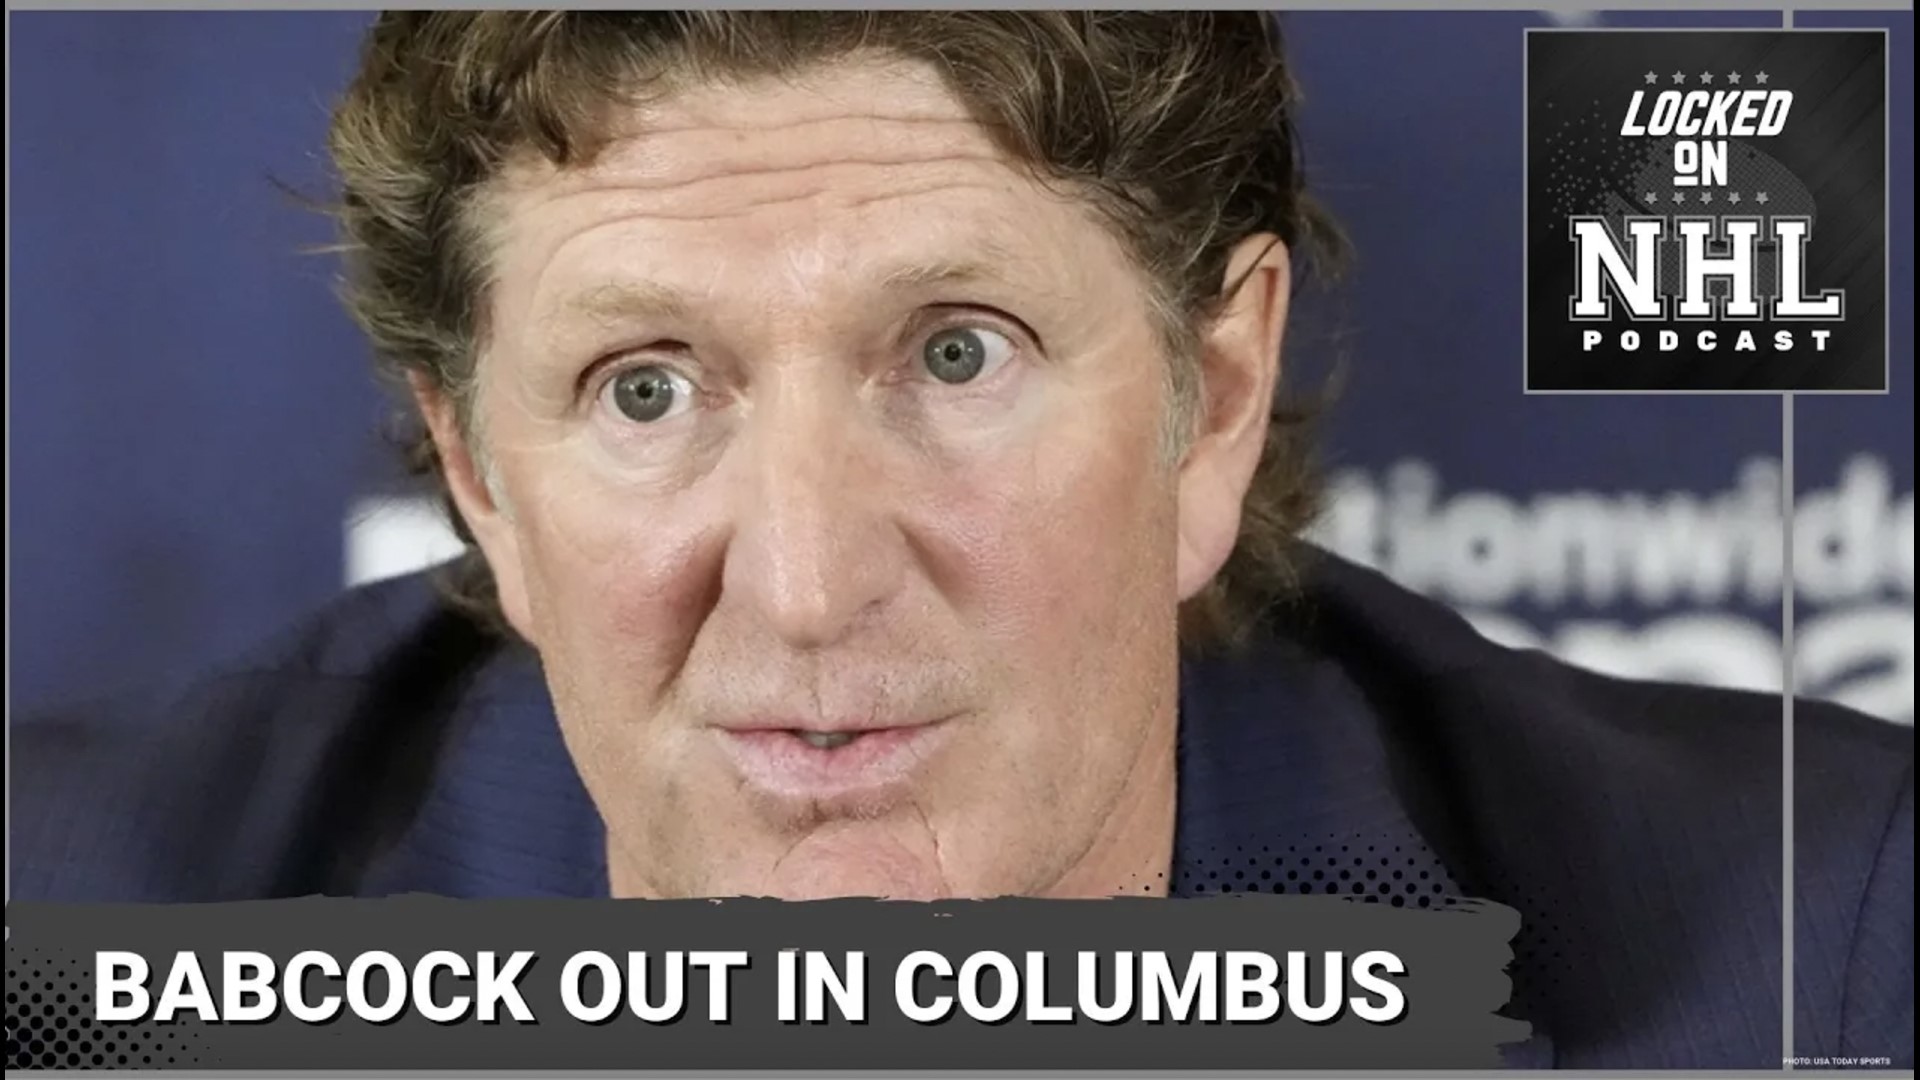 The Columbus Blue Jackets have a new coach as Mike Babcock resigned amid the ongoing controversy about his behavior in the locker room.